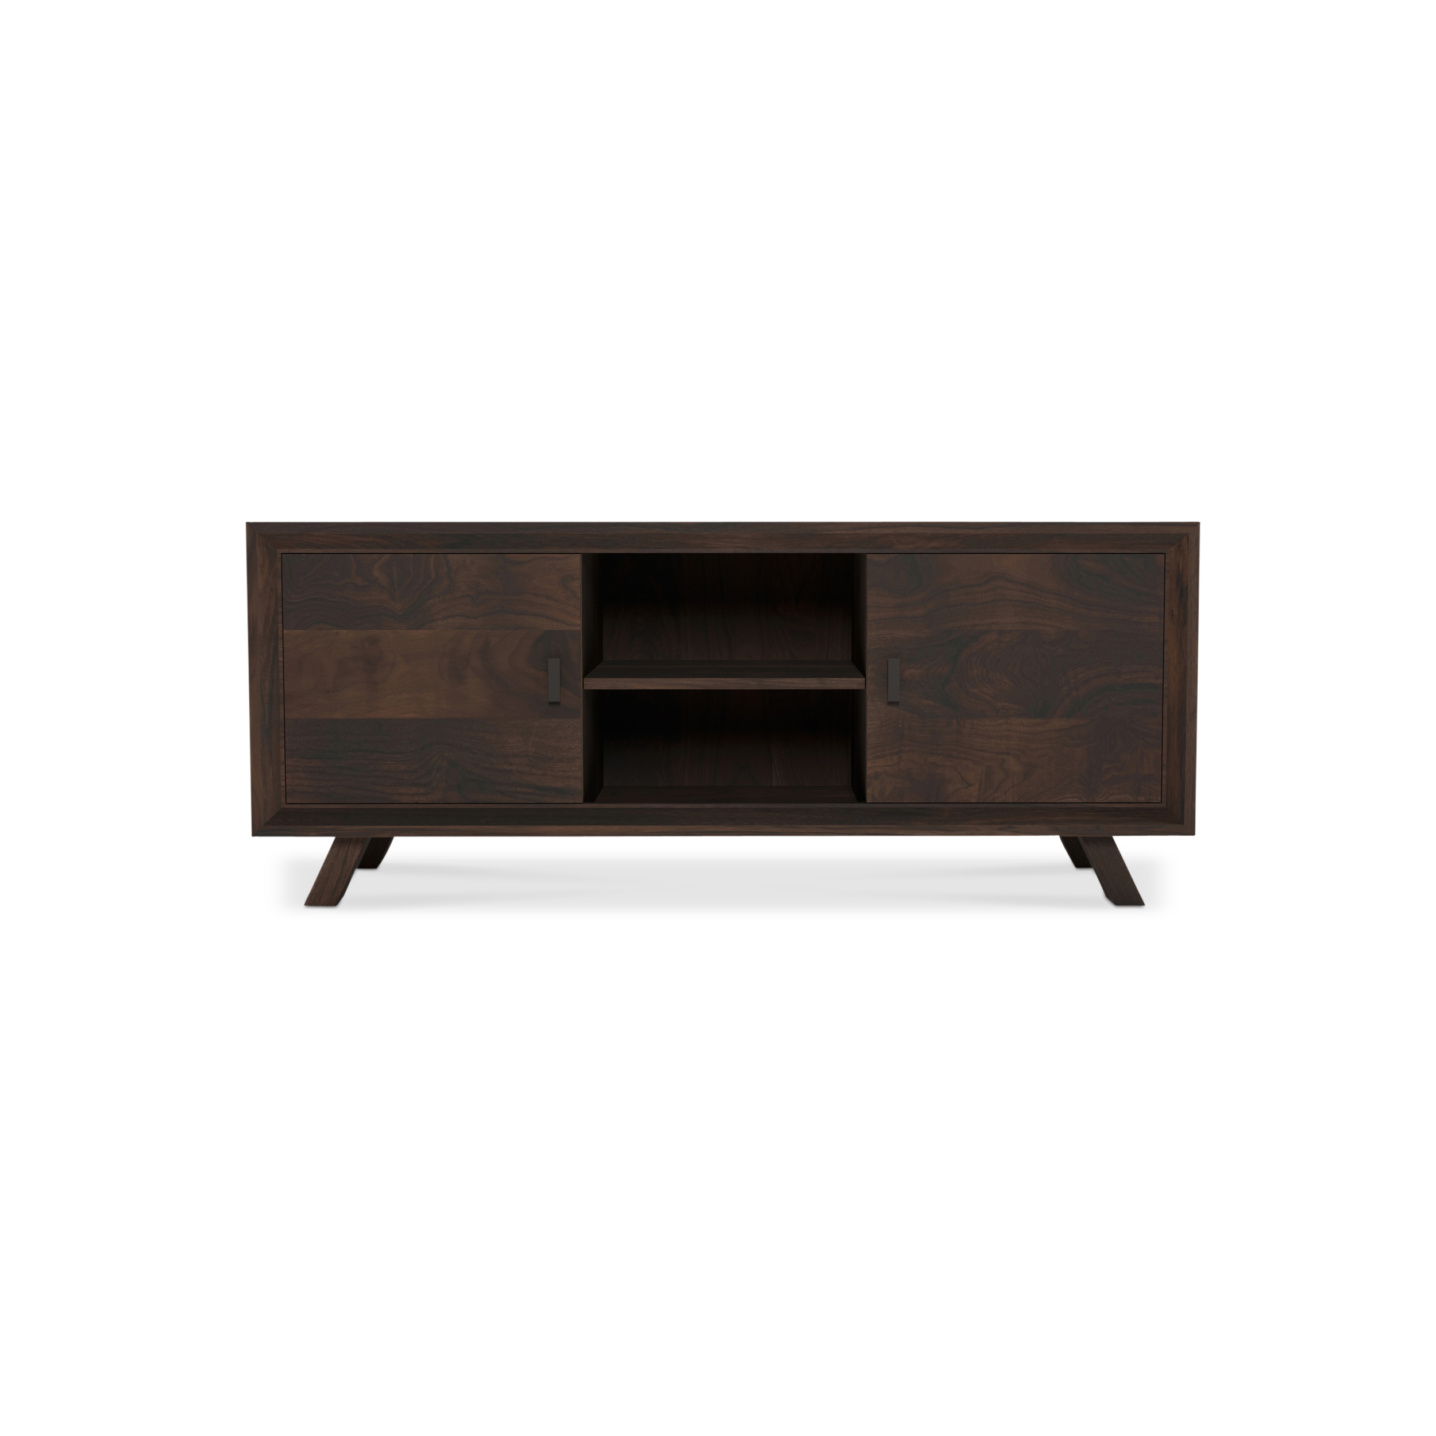 Solid walnut media cabinet with two doors